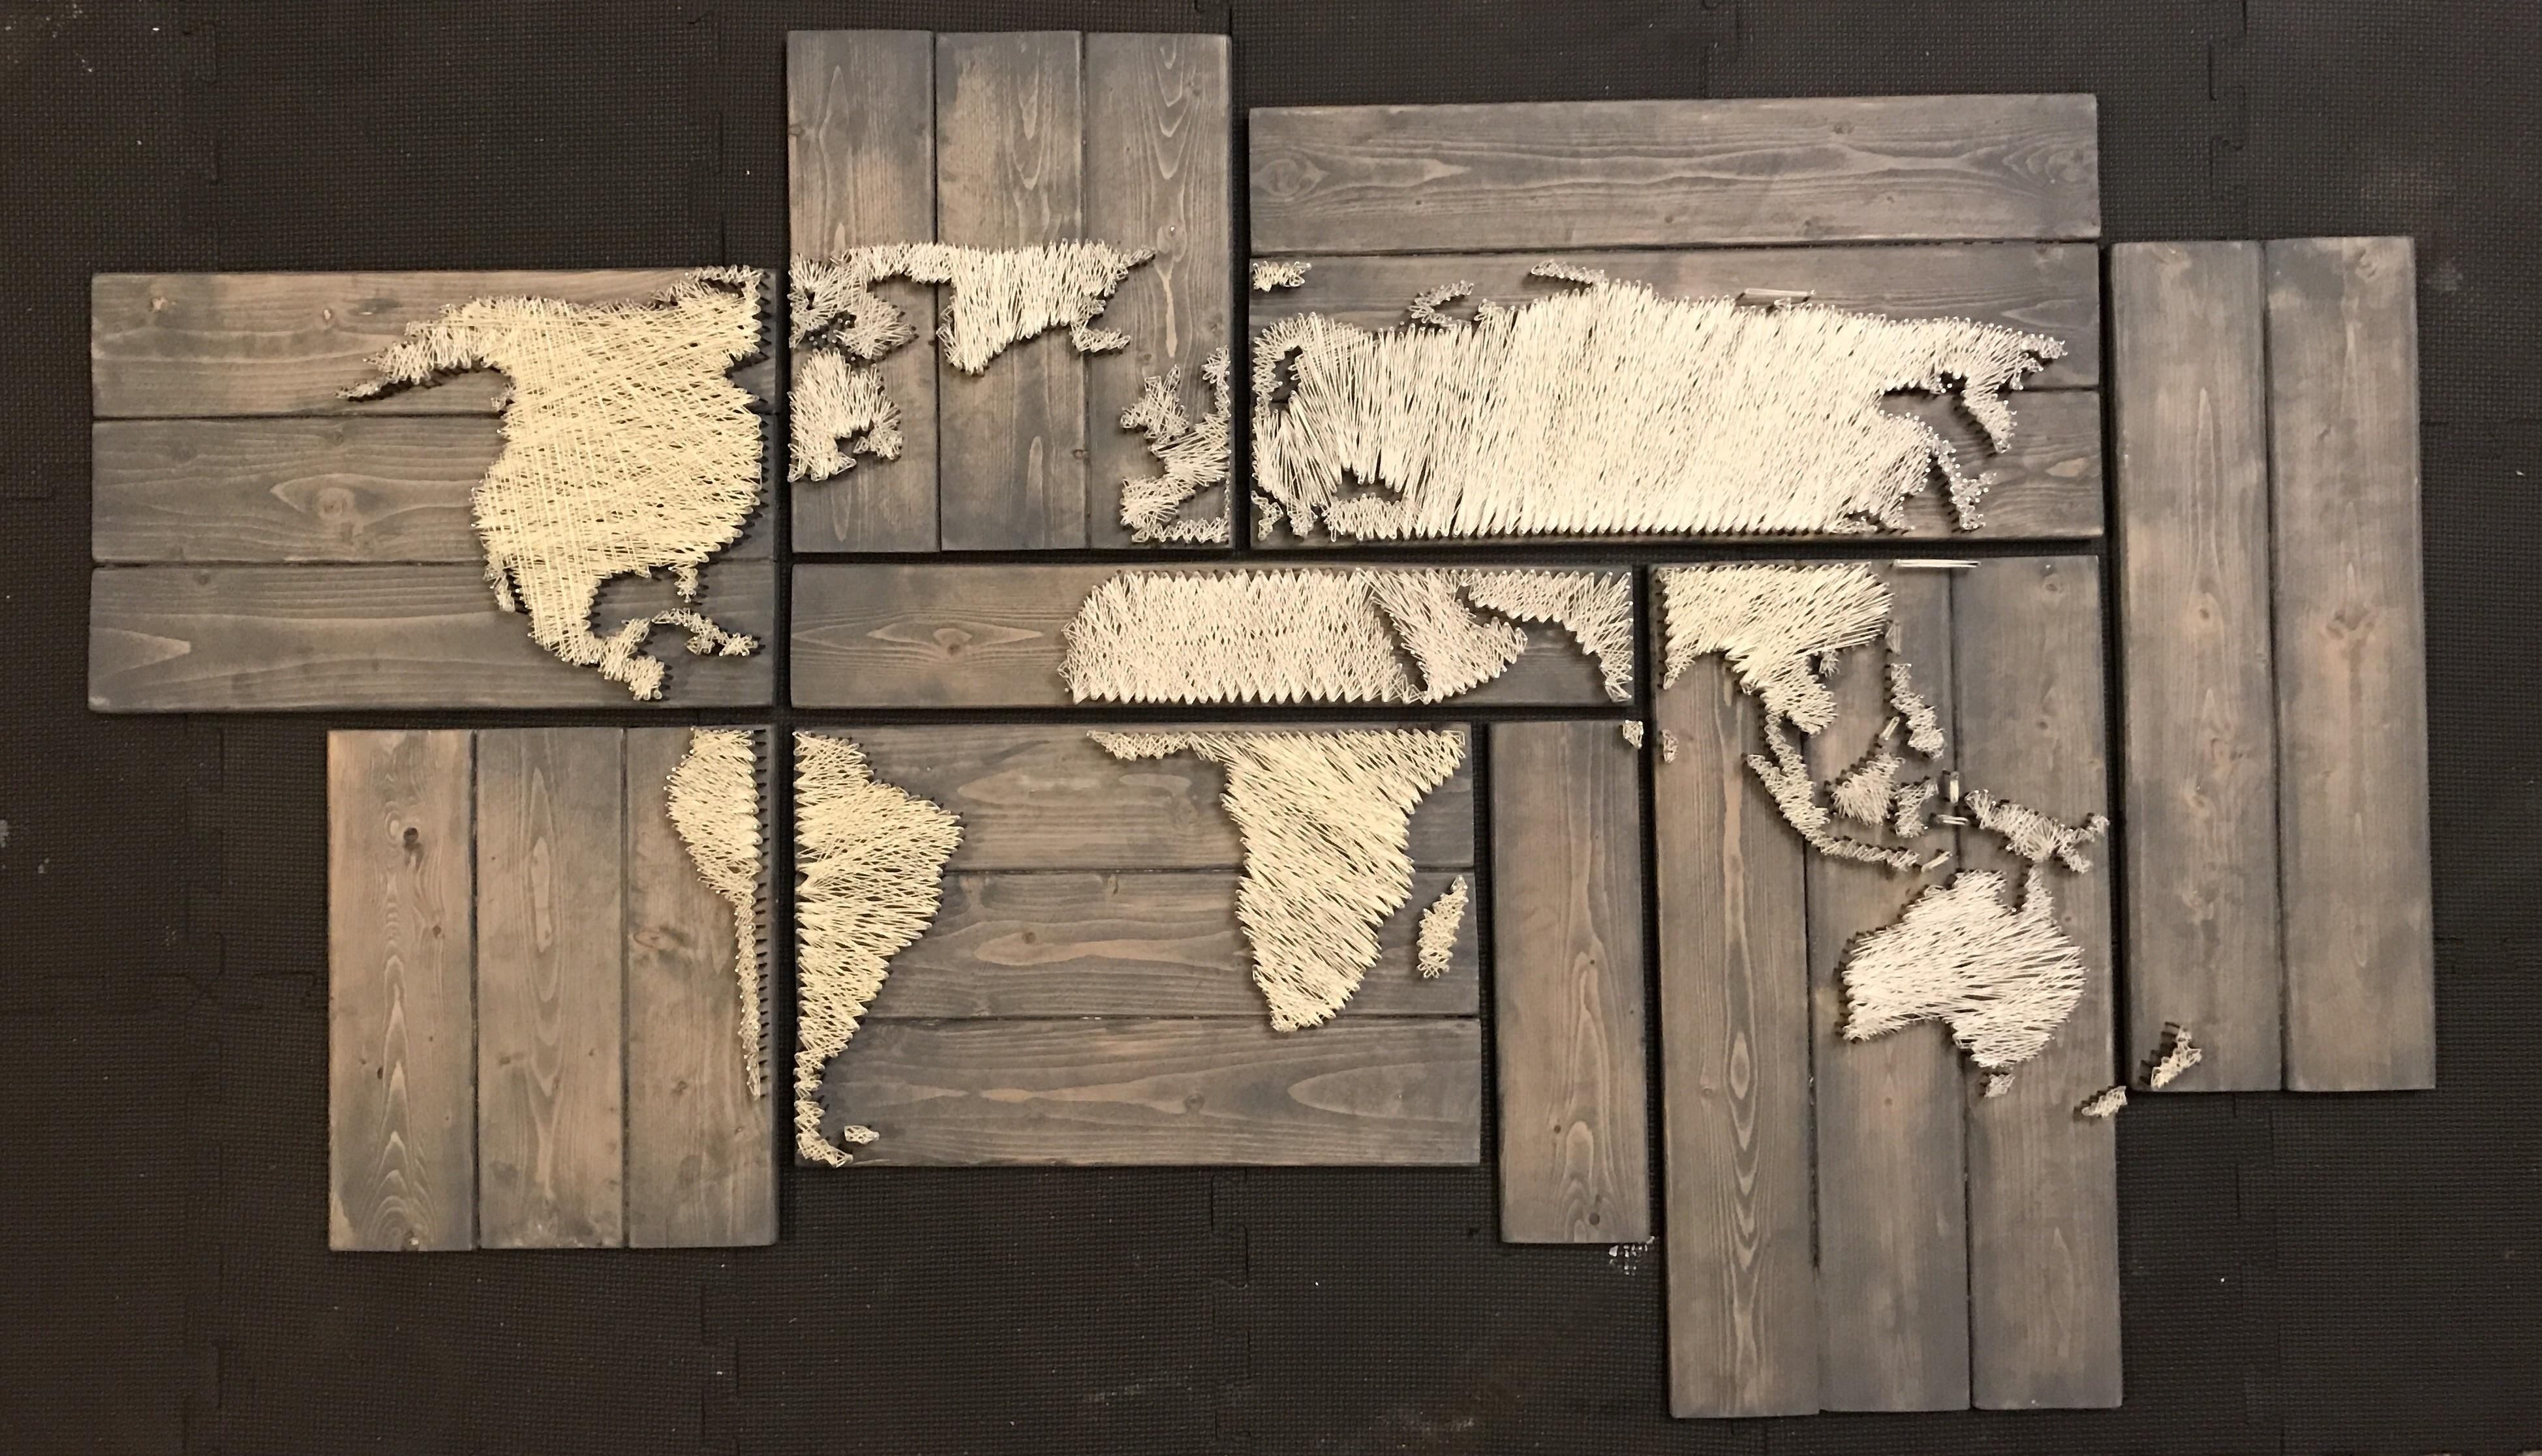 With Over 1,000 Nails And 400 Yards Of String, My World String Art Regarding String Map Wall Art (View 12 of 20)